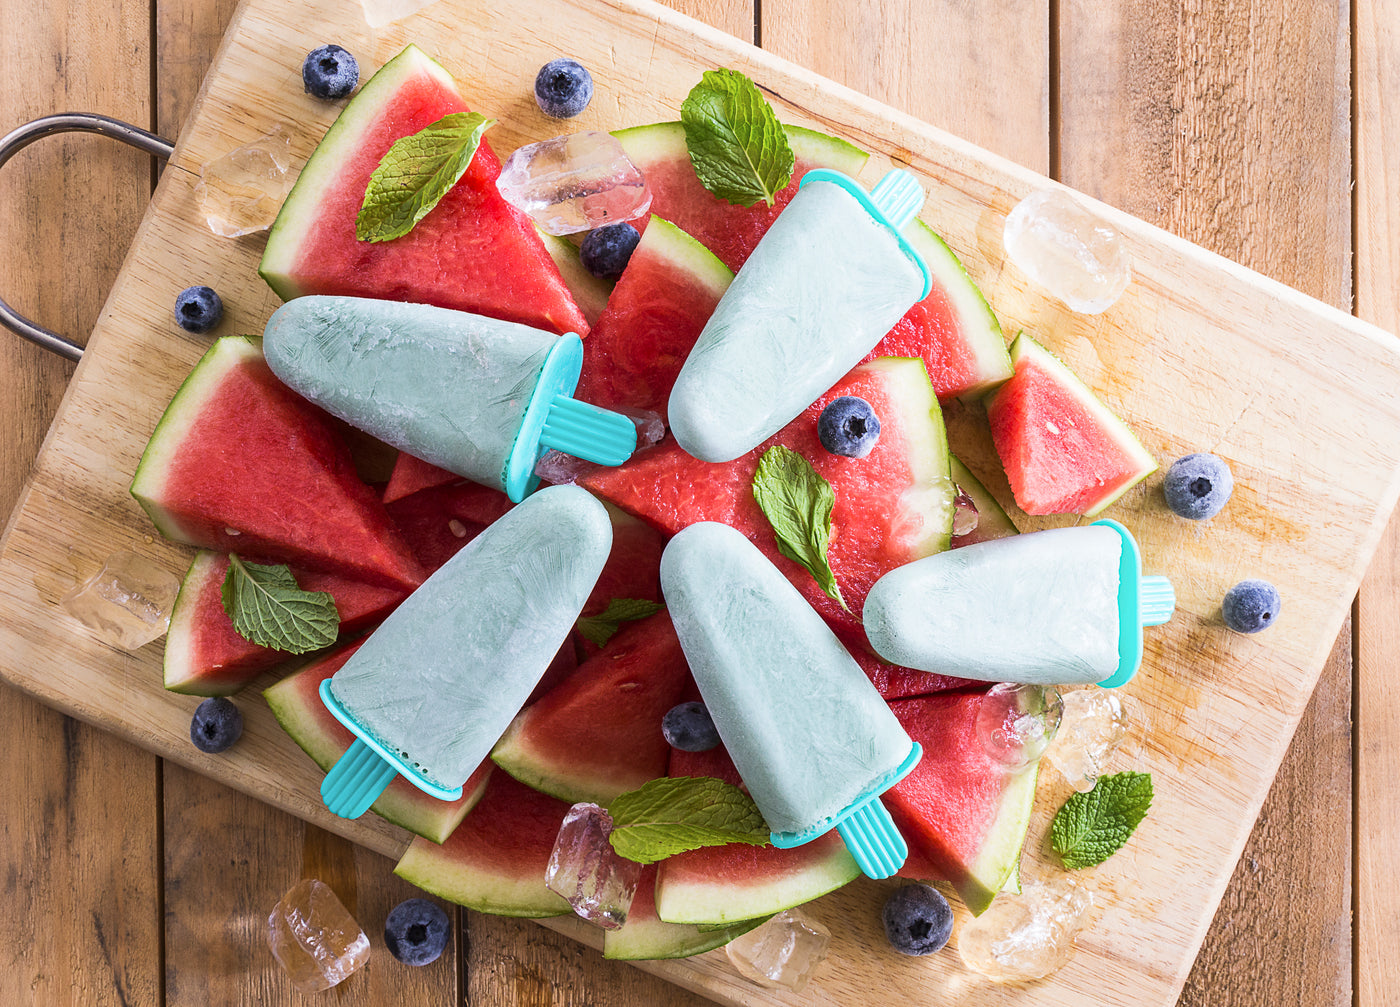 Do you have fussy eaters? Do you want a nutritional, yummy snack that they will love?  Goodness me popsicles